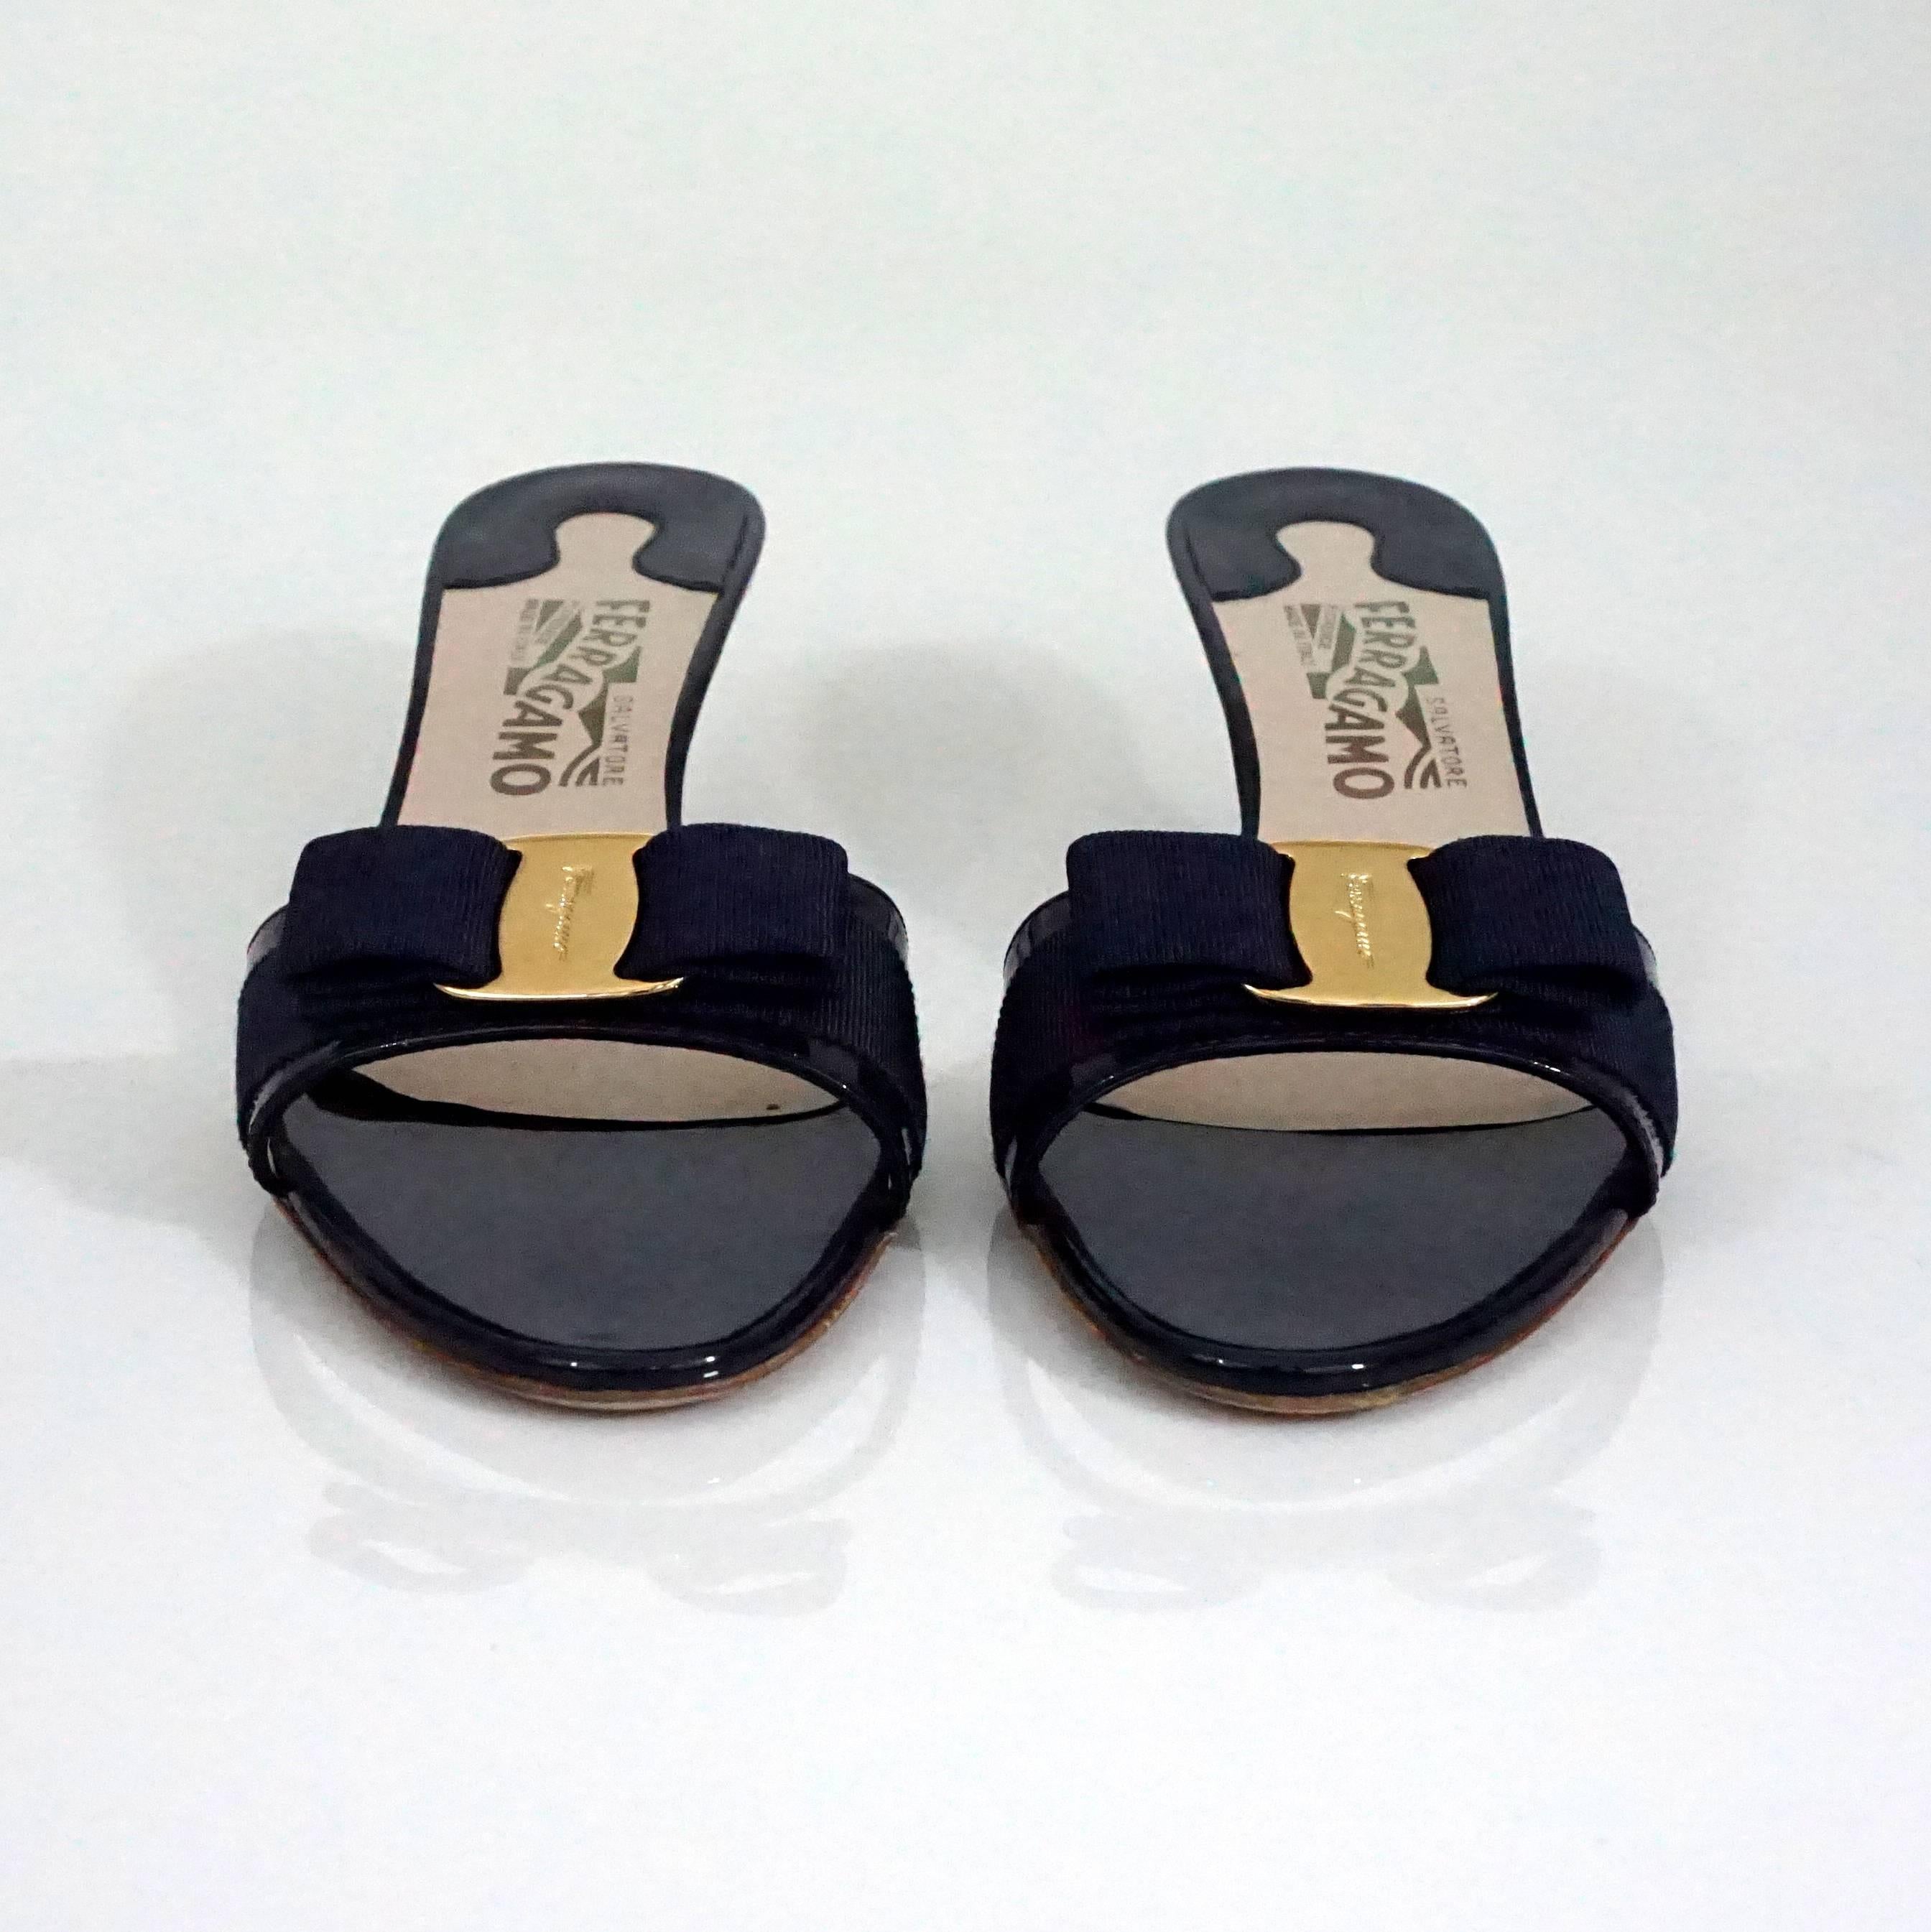 Black Salvatore Ferragamo Navy Patent Slides with Bow and Gold Logo - 9